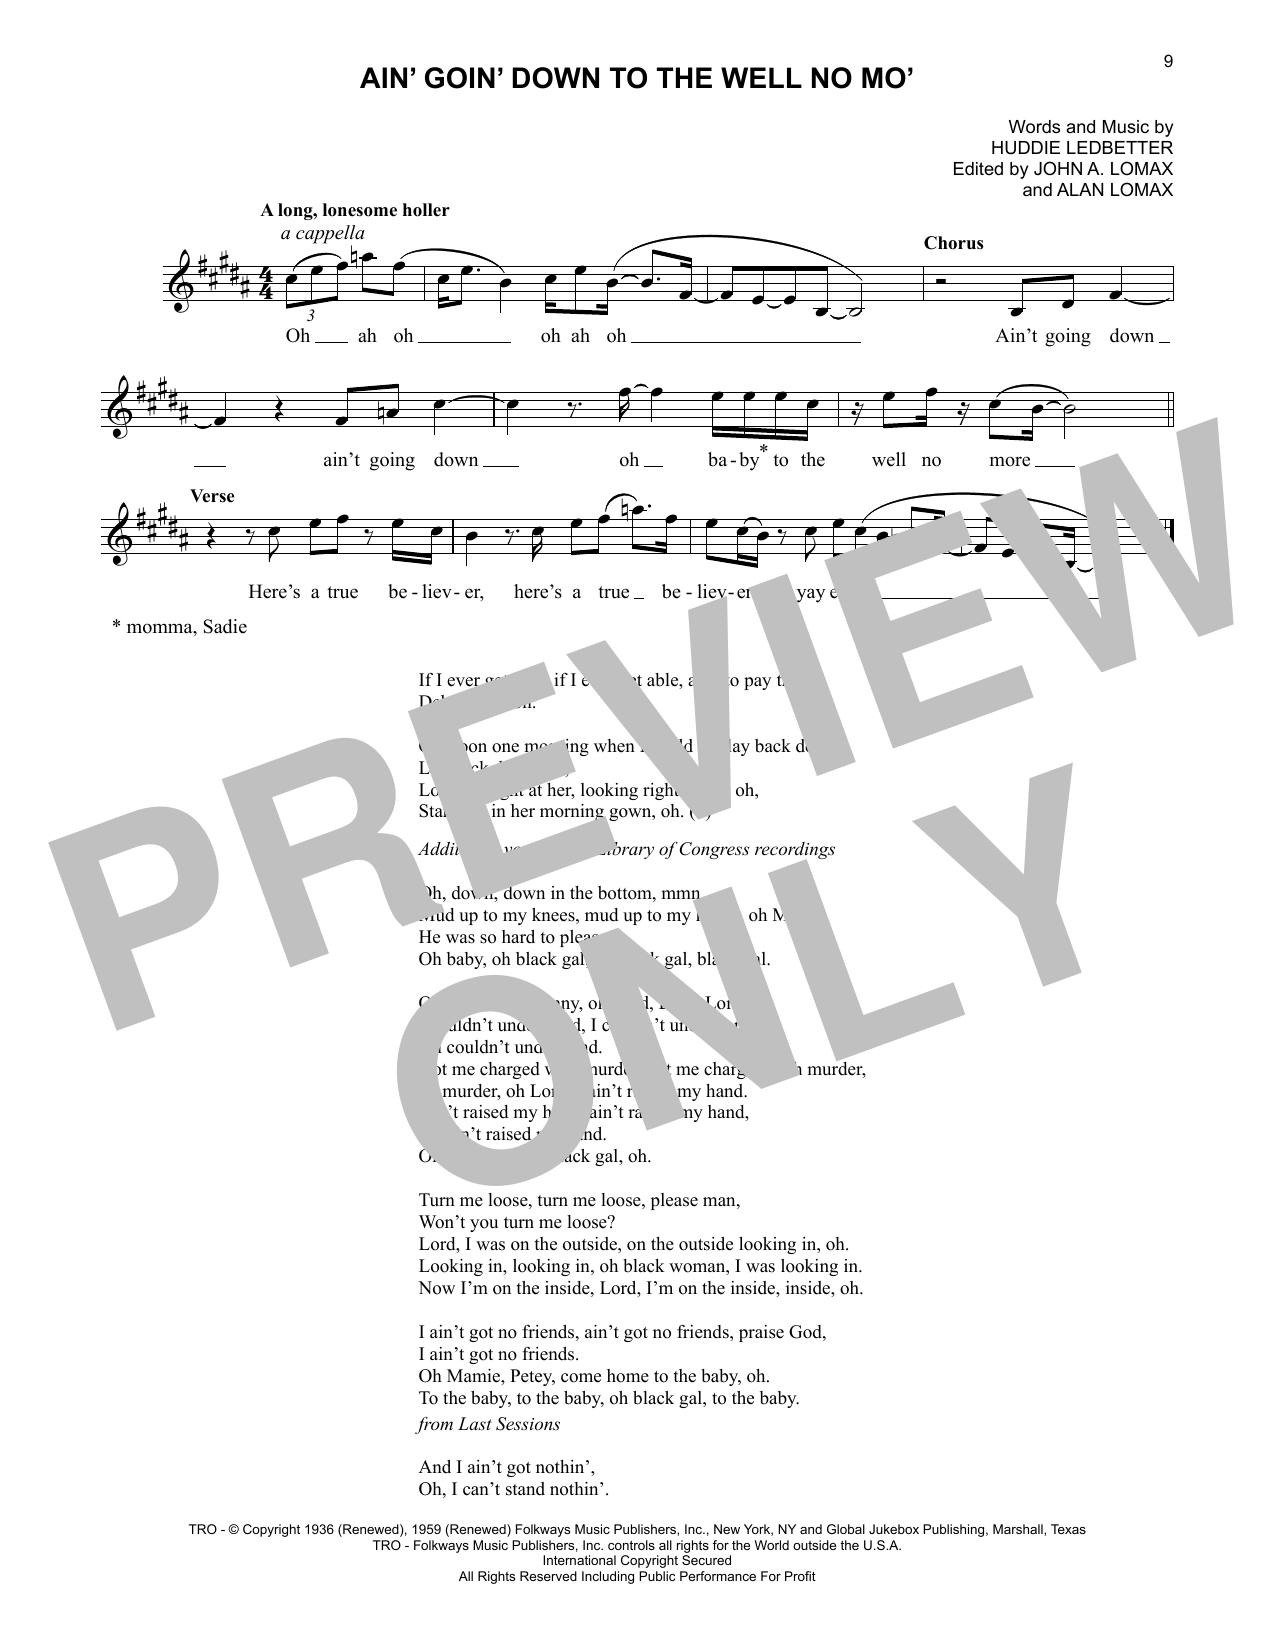 Lead Belly Ain' Goin' Down To The Well No Mo' sheet music notes printable PDF score